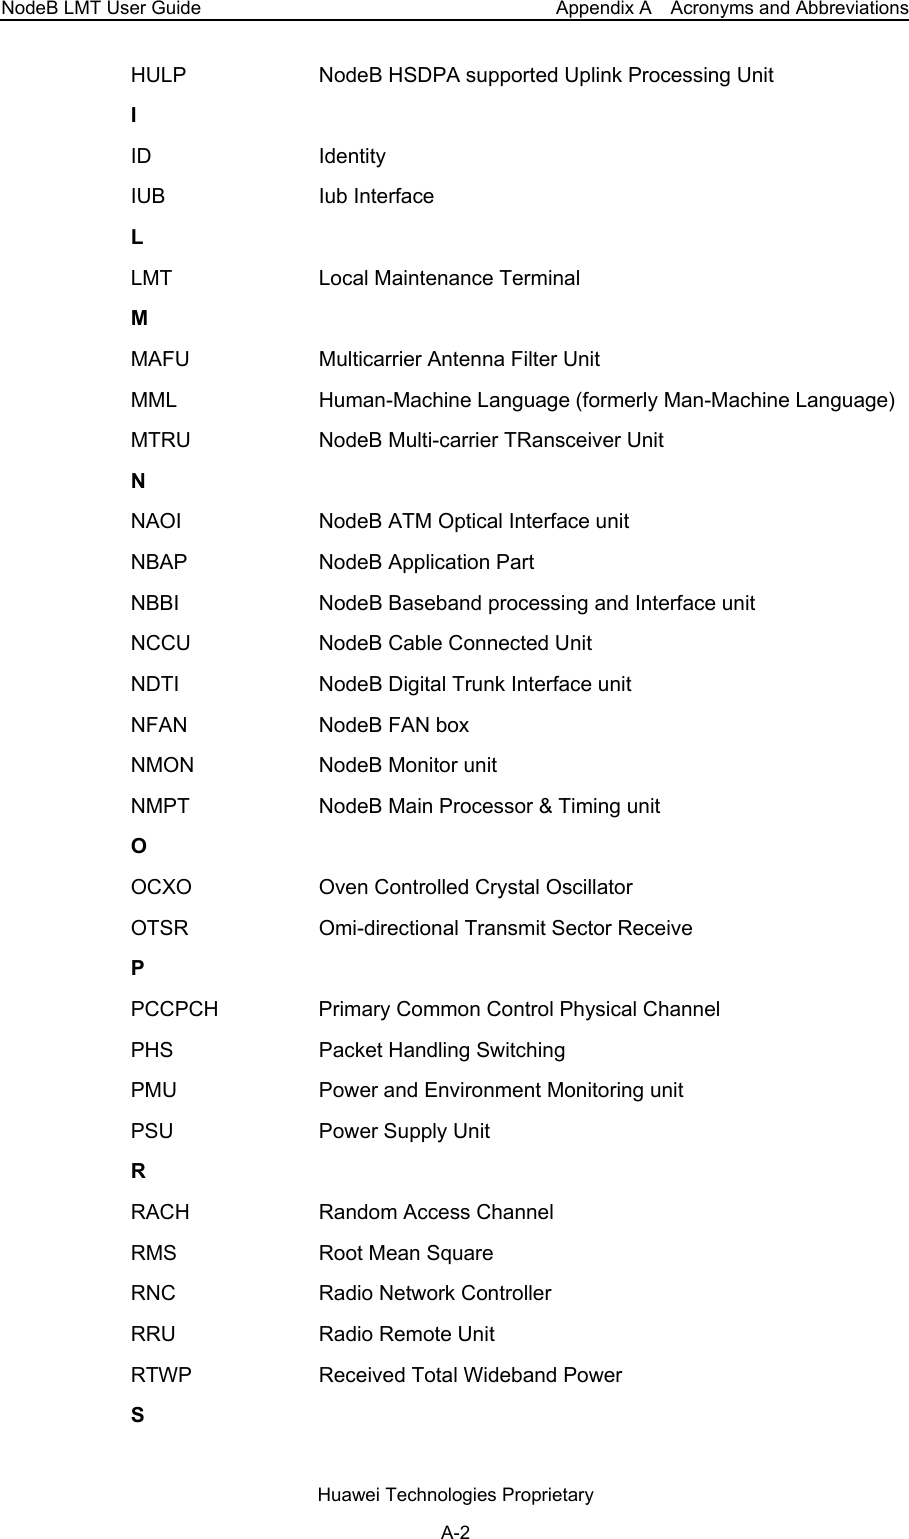 NodeB LMT User Guide  Appendix A    Acronyms and Abbreviations HULP  NodeB HSDPA supported Uplink Processing Unit I ID Identity IUB Iub Interface L LMT  Local Maintenance Terminal M MAFU  Multicarrier Antenna Filter Unit MML  Human-Machine Language (formerly Man-Machine Language)MTRU NodeB Multi-carrier TRansceiver Unit N NAOI  NodeB ATM Optical Interface unit NBAP  NodeB Application Part NBBI  NodeB Baseband processing and Interface unit NCCU  NodeB Cable Connected Unit NDTI  NodeB Digital Trunk Interface unit NFAN NodeB FAN box NMON  NodeB Monitor unit NMPT  NodeB Main Processor &amp; Timing unit O OCXO  Oven Controlled Crystal Oscillator OTSR Omi-directional Transmit Sector Receive P PCCPCH  Primary Common Control Physical Channel PHS  Packet Handling Switching PMU  Power and Environment Monitoring unit PSU  Power Supply Unit R RACH  Random Access Channel RMS  Root Mean Square RNC  Radio Network Controller RRU  Radio Remote Unit RTWP  Received Total Wideband Power S Huawei Technologies Proprietary A-2 